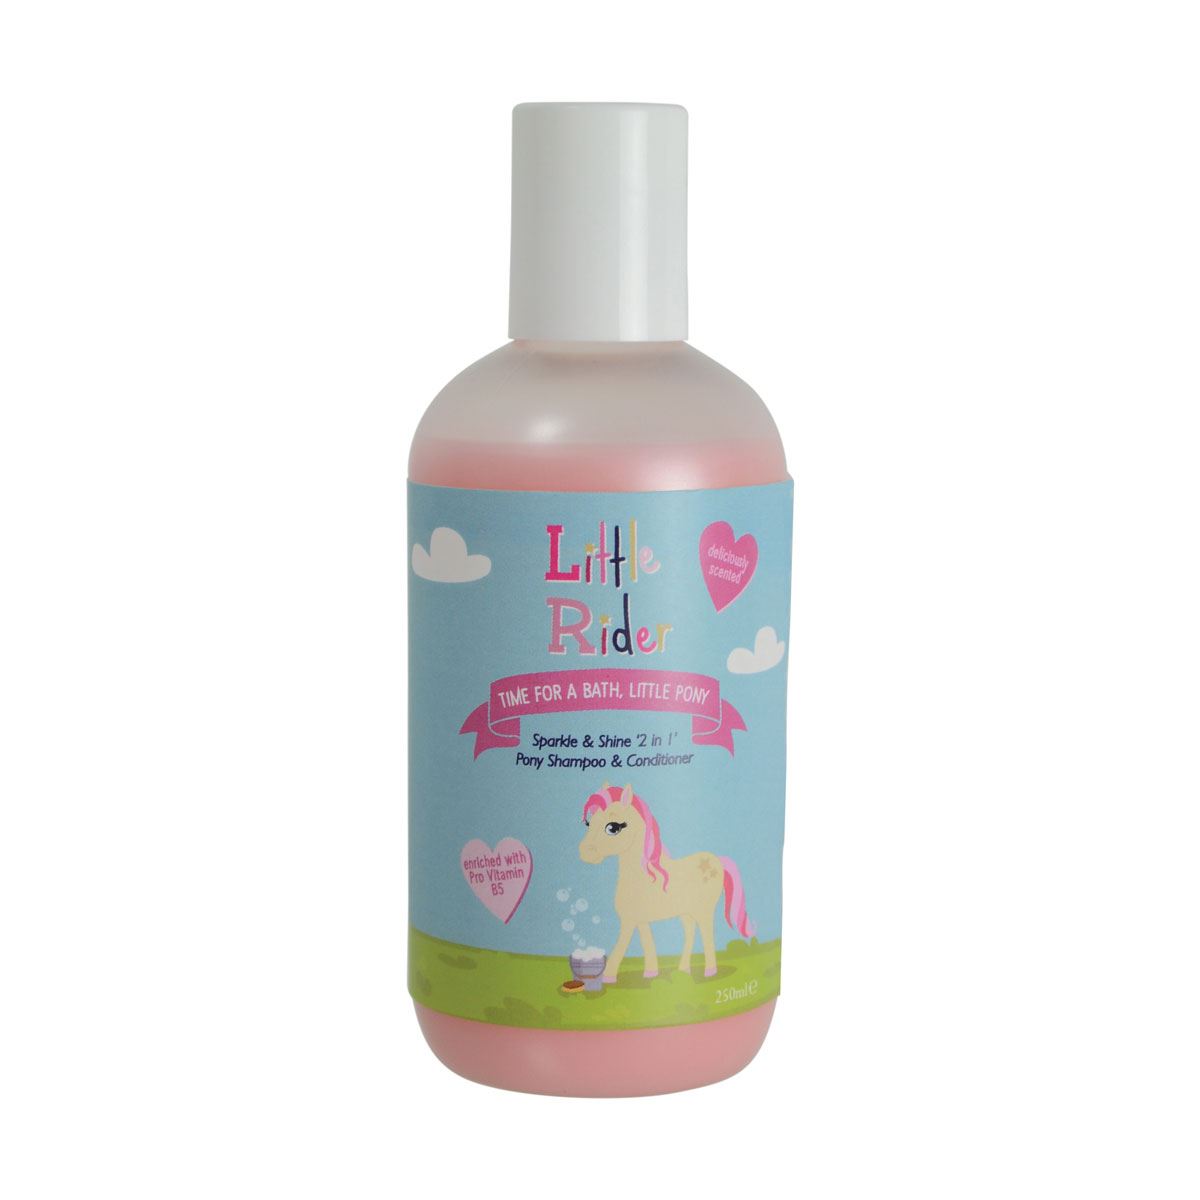 Little Rider Sparkle & Shine ‘2 in 1’ Pony Shampoo & Conditioner - Just Horse Riders